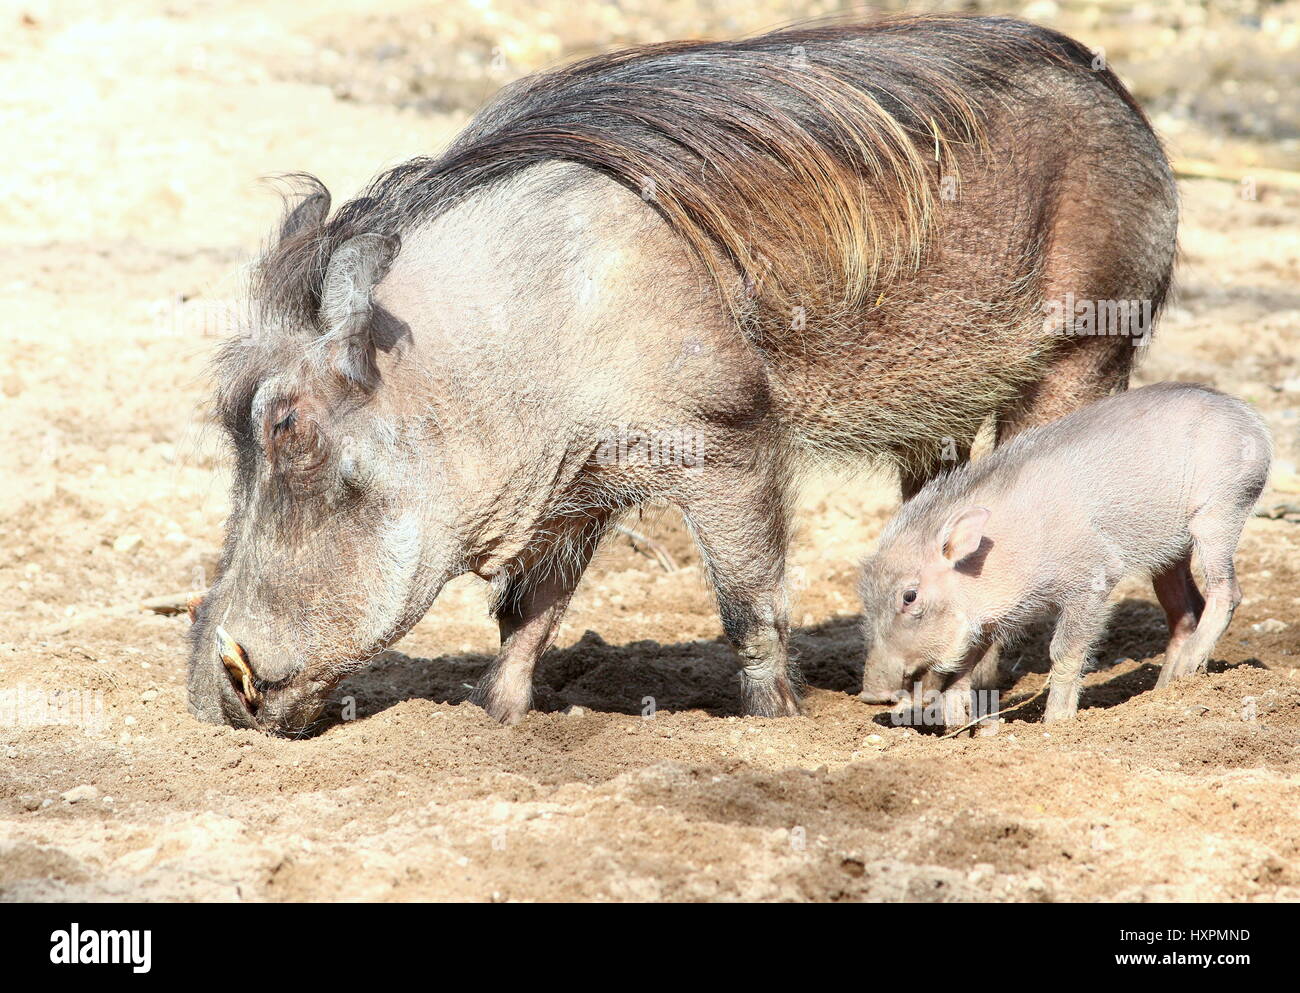 Mother African warthog (Phacochoerus africanus) with baby piglet. Stock Photo